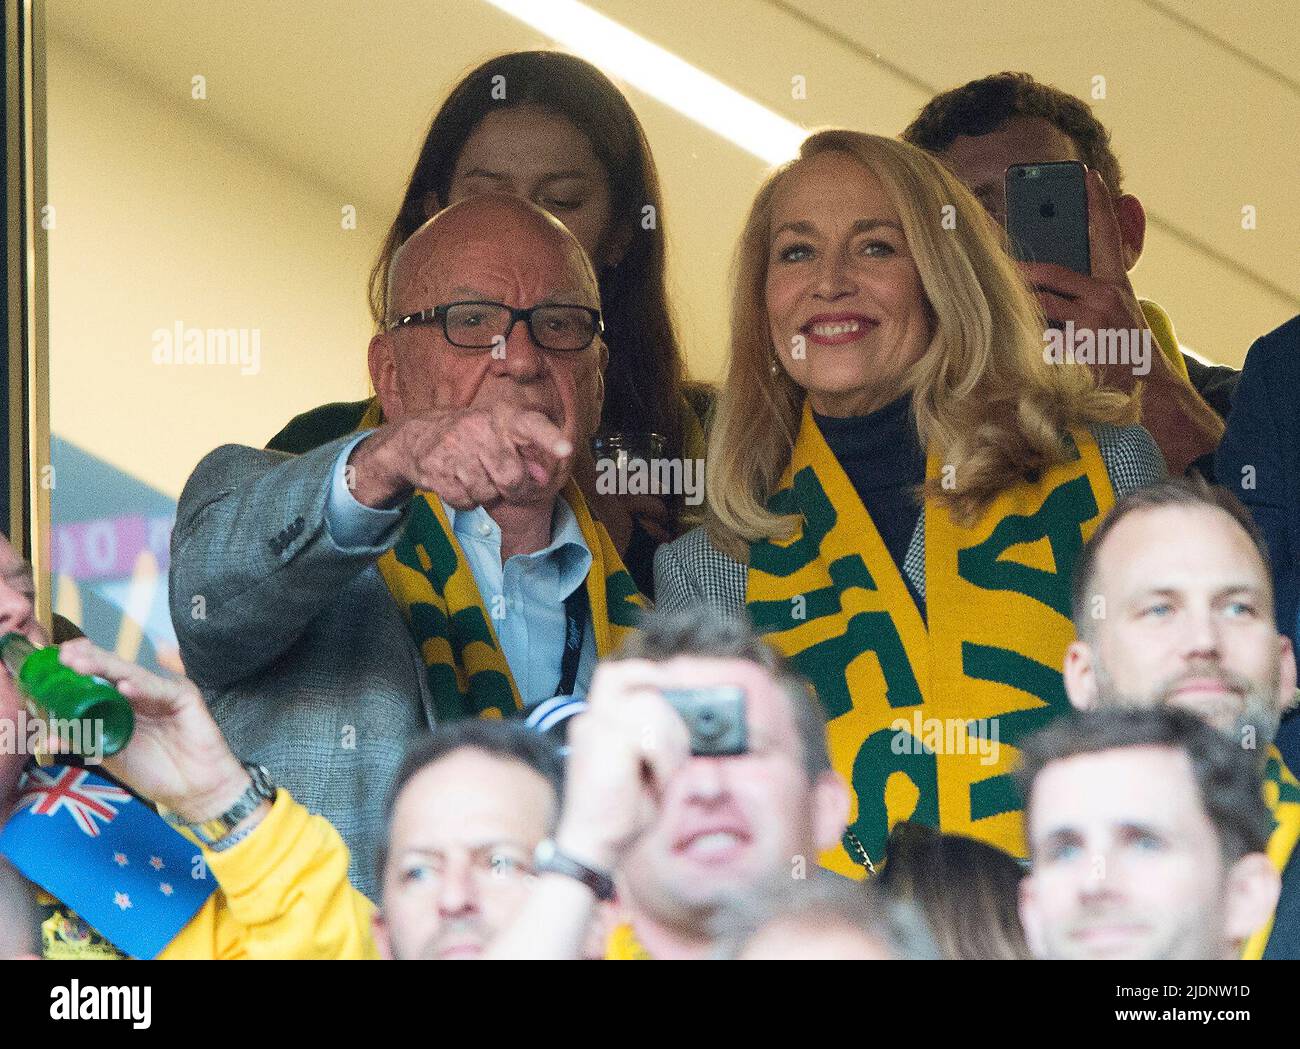 *** FILE PHOTO ***  Jerry Hall and Rupet Murdoch pictured together as a couple for the first time in a VIP hospitality box watching the Rugby World Cup Final 2015 at Twickenham between Australia and New Zealand.  Rugby World Cup 2015 - Final  Twickenham Stadium - 31/10/2015 Copyright Picture : Mark Pain / Alamy Live News Stock Photo